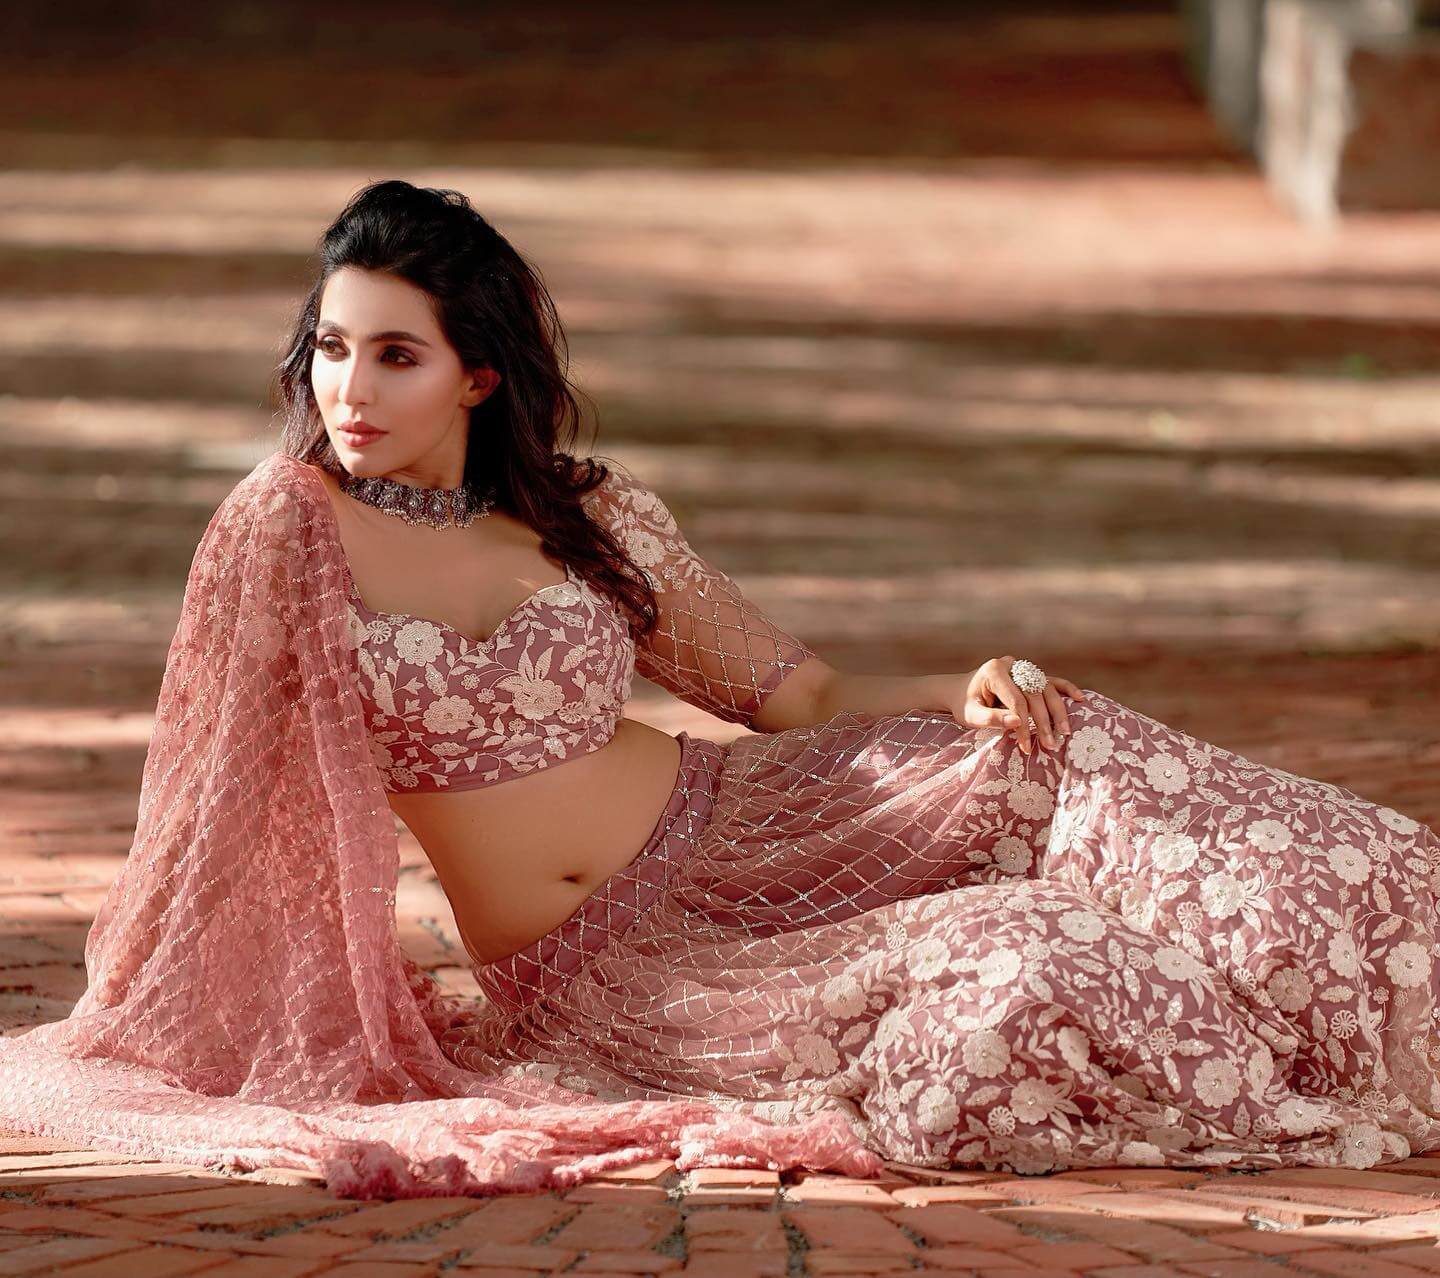 Parvathy Nair Flattering Look In Dusky Pink & White Floral Embroidered Lehenga Set